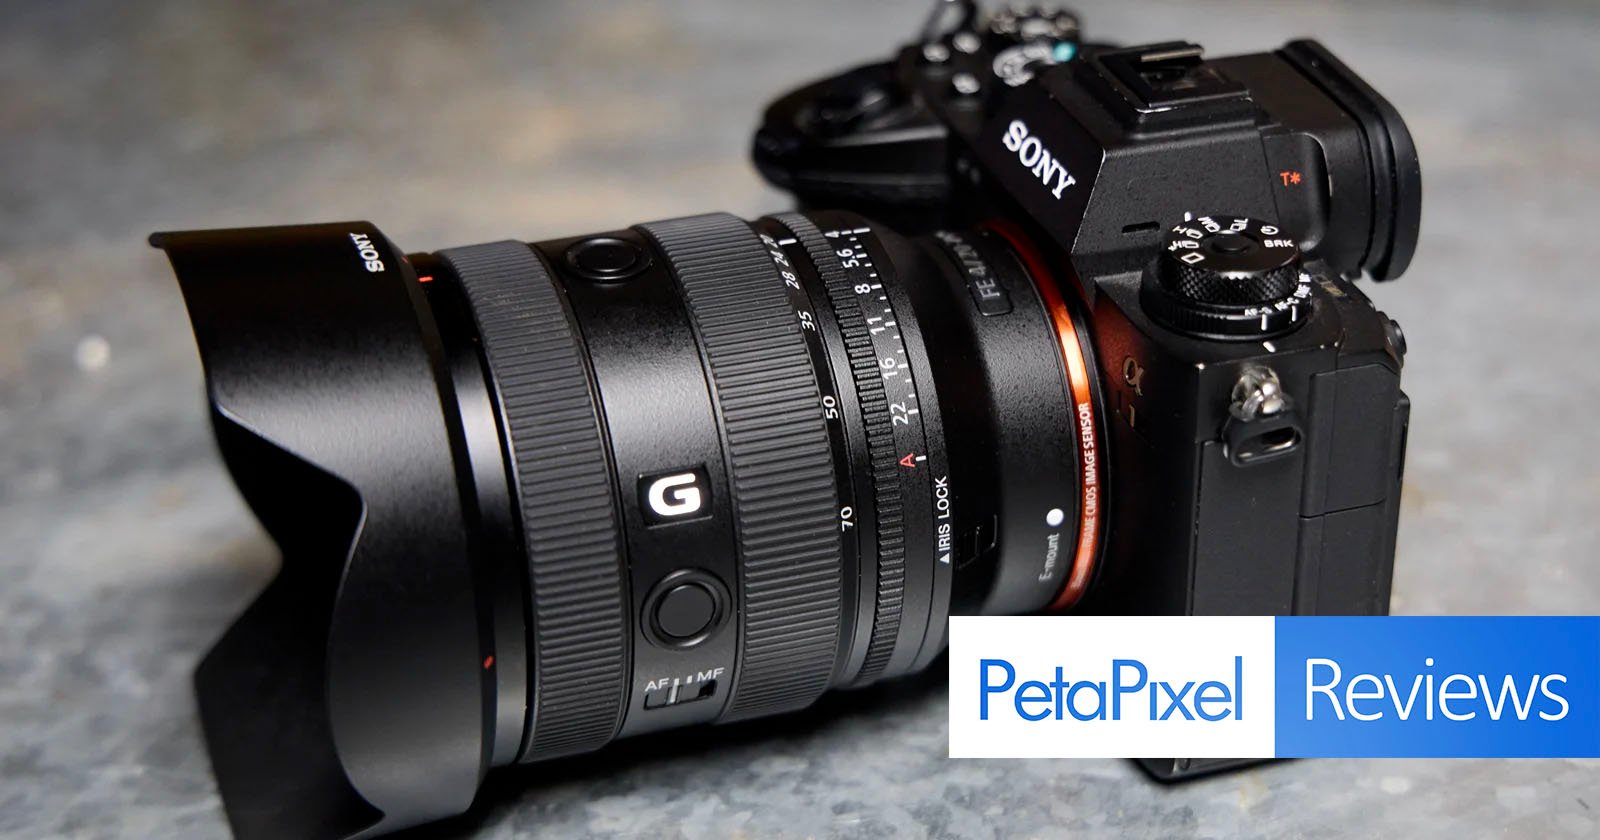 The next lens from Sony: FE 24-70mm f/2.8 GM II - Photo Rumors